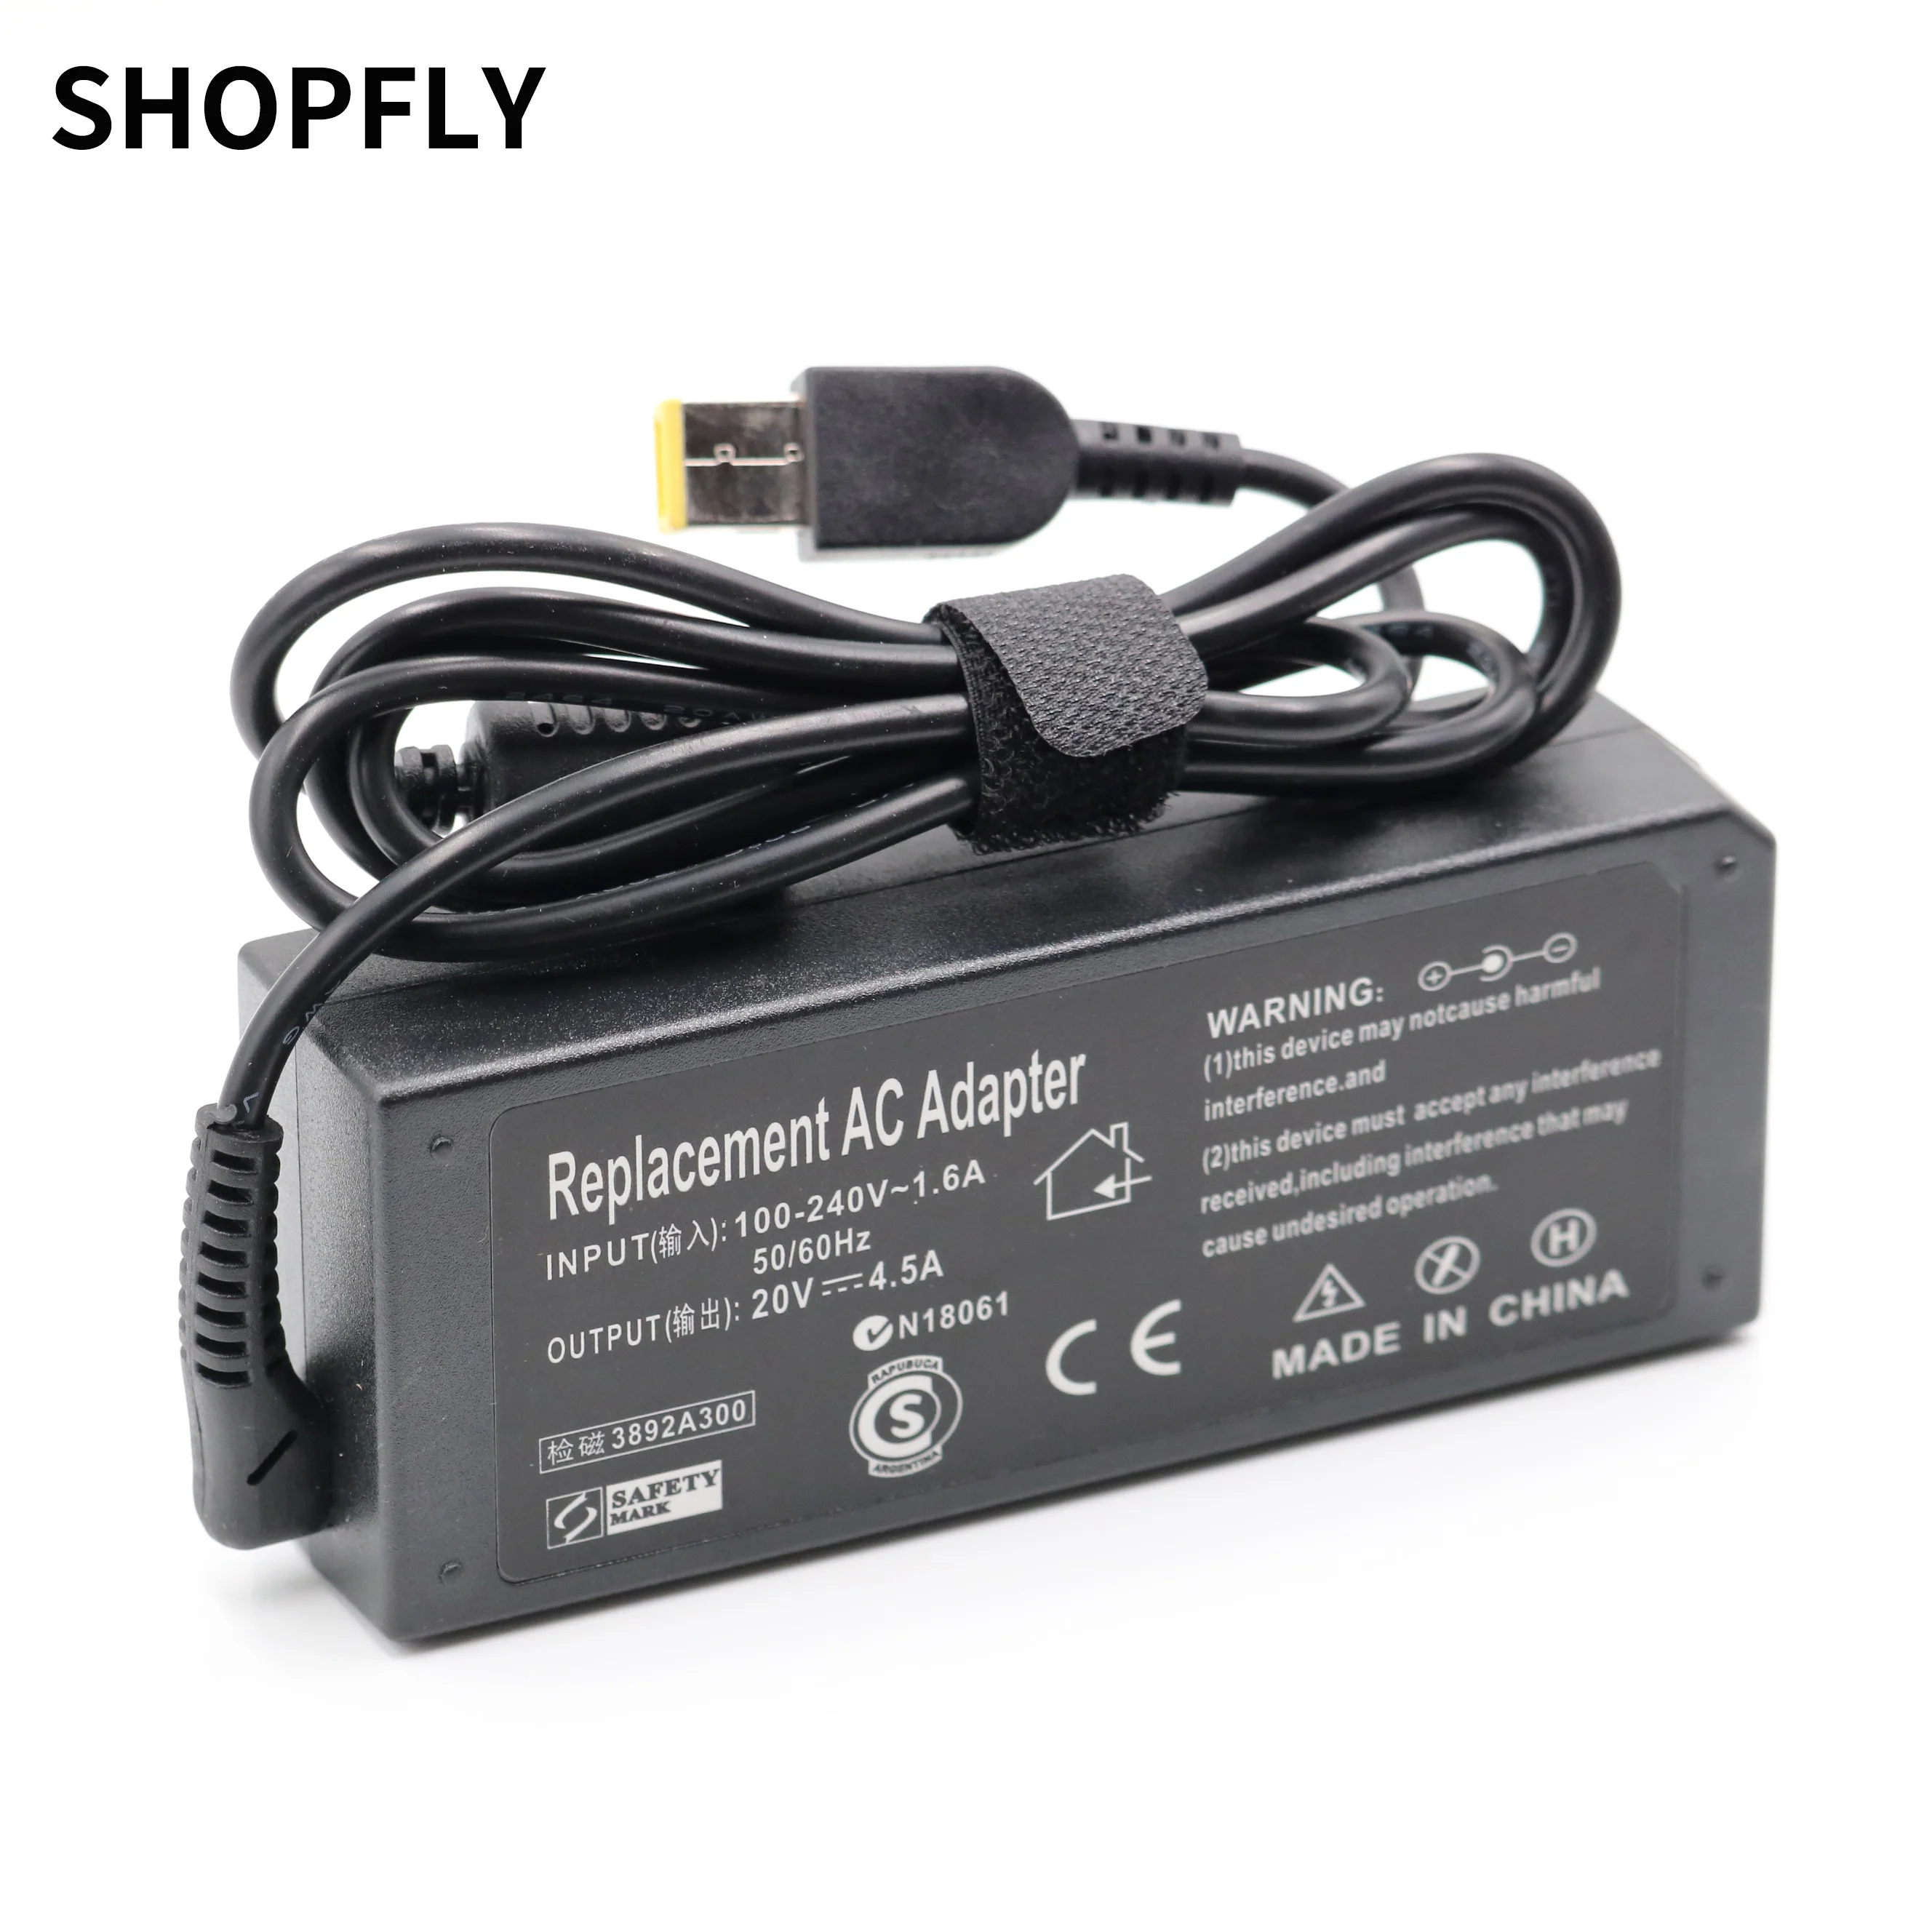 

20V 4.5A 90W AC Laptop Power Charger Adapter For Lenovo IdeaPad G405s G500 G500s G505 G505s G510 G700